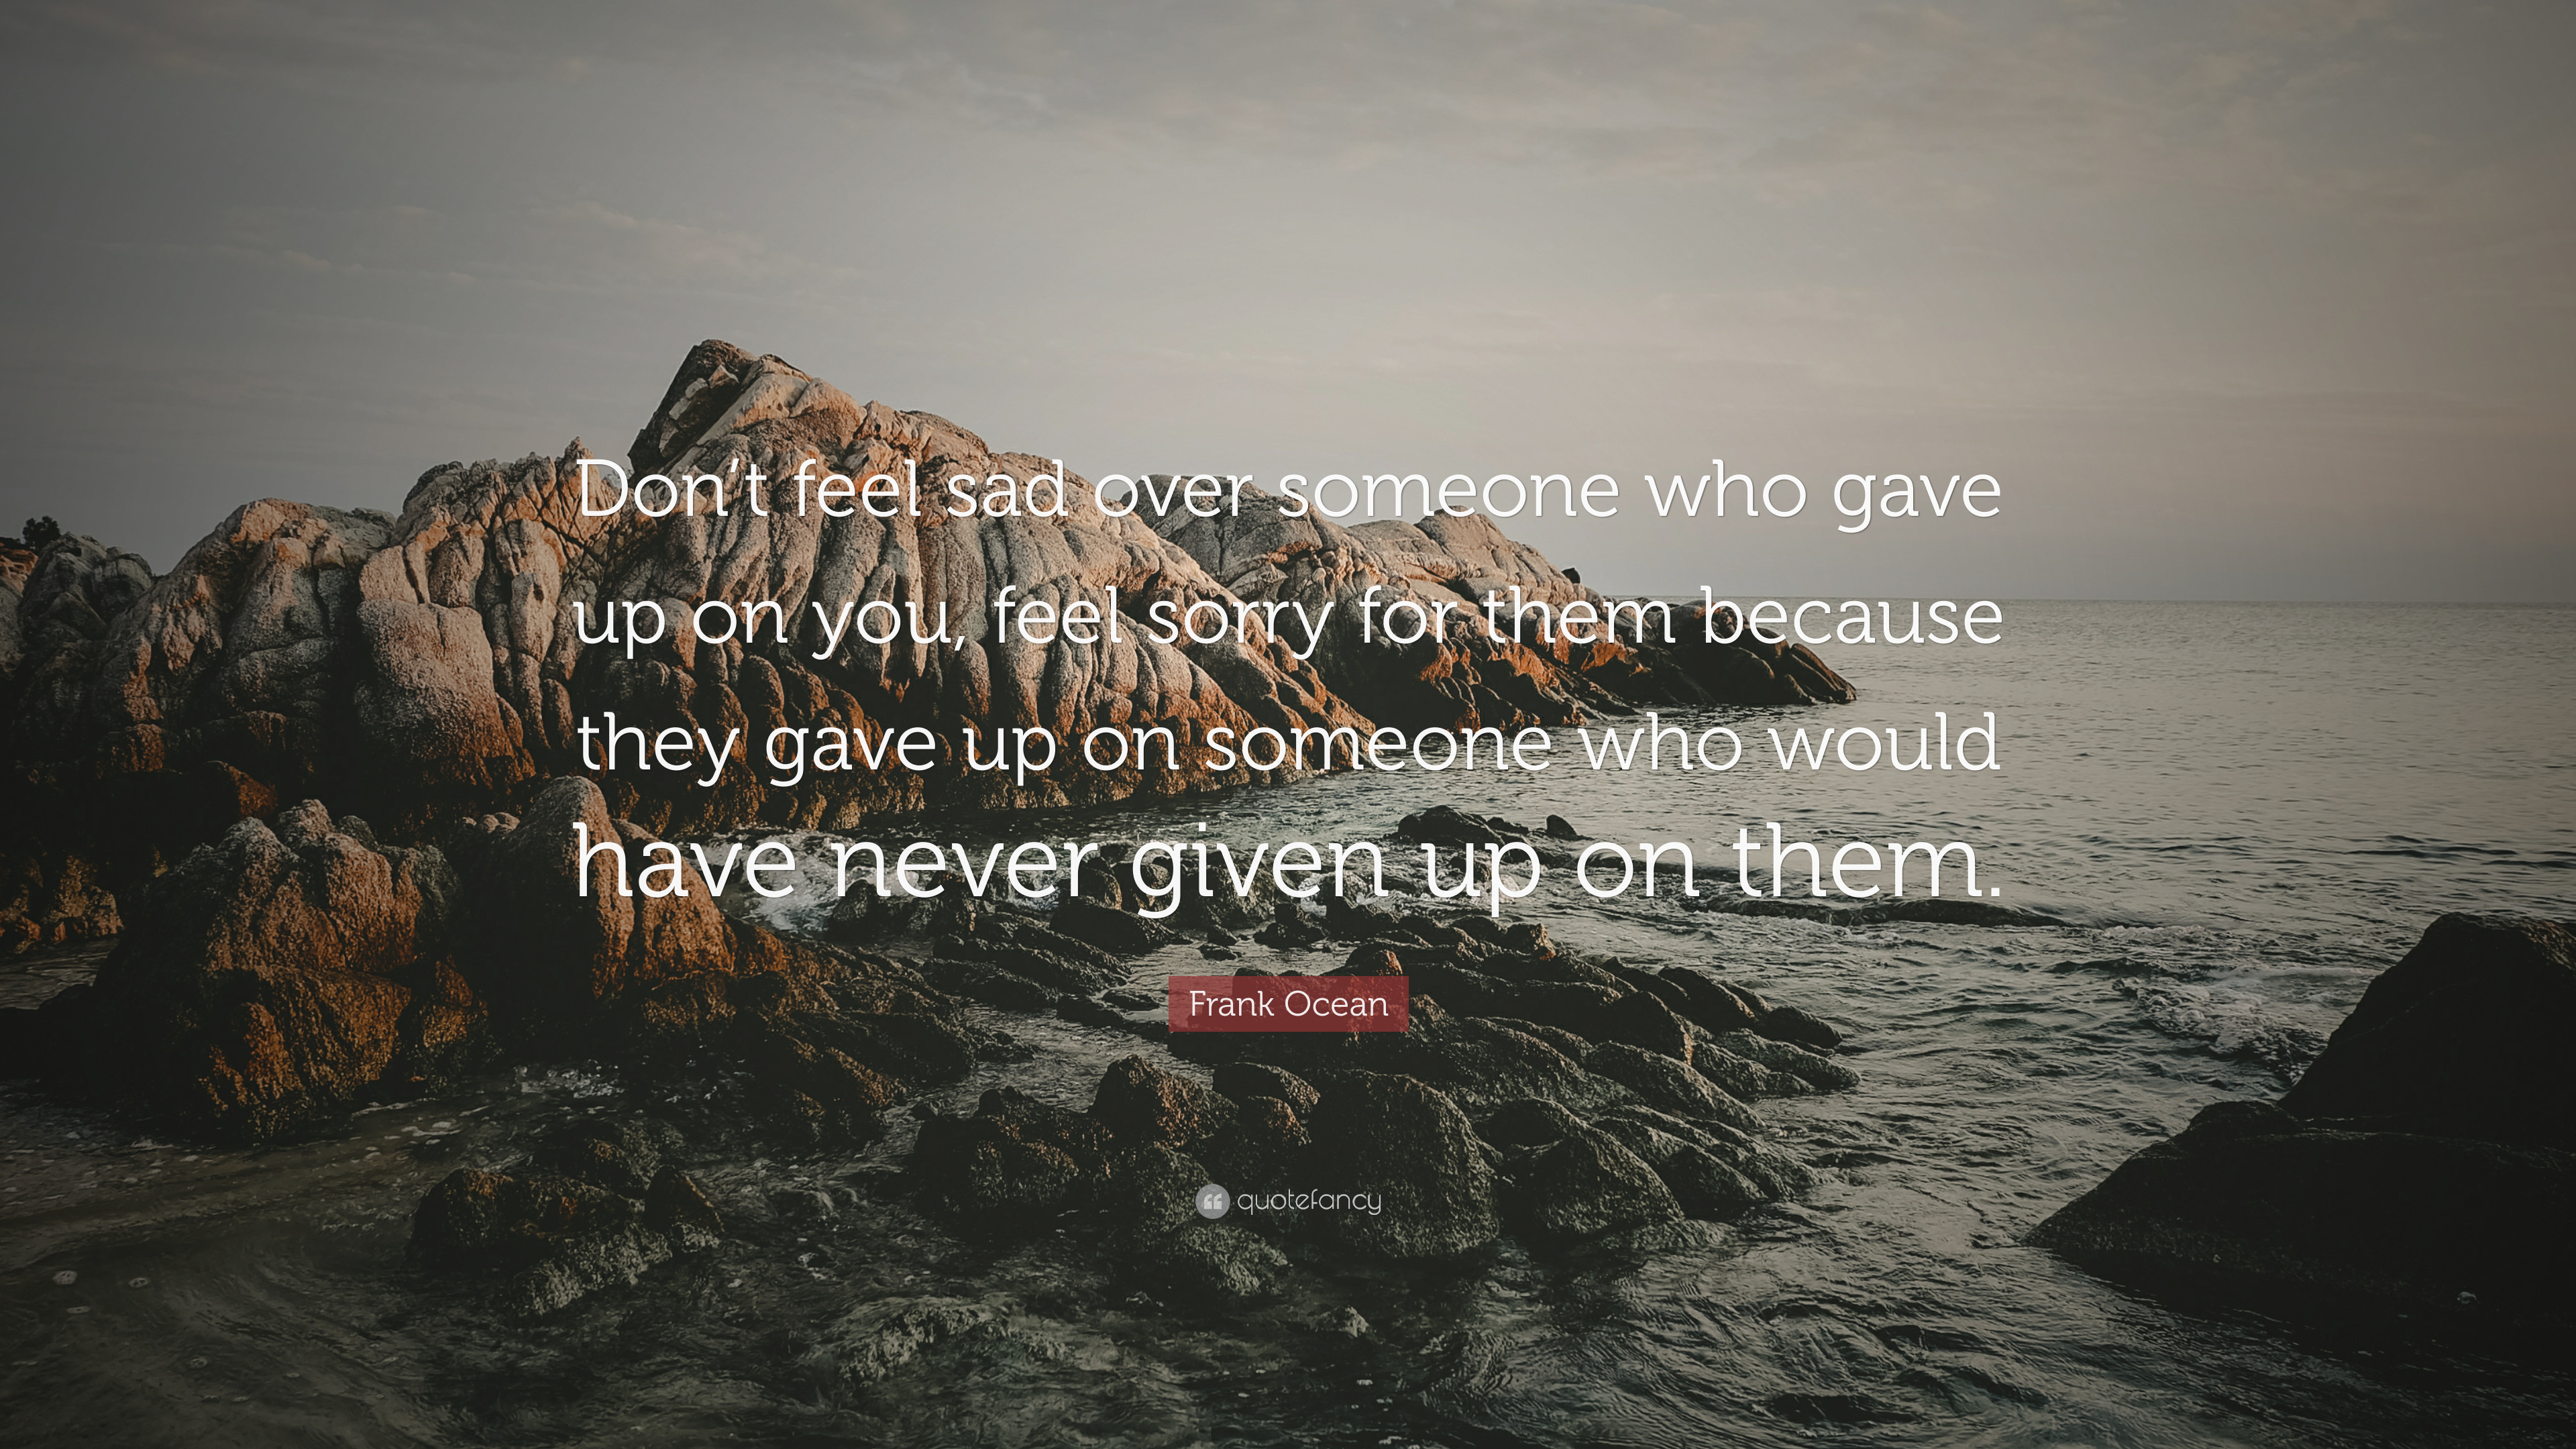 3840x2160 Frank Ocean Quote: “Don't feel sad over someone who gave up on